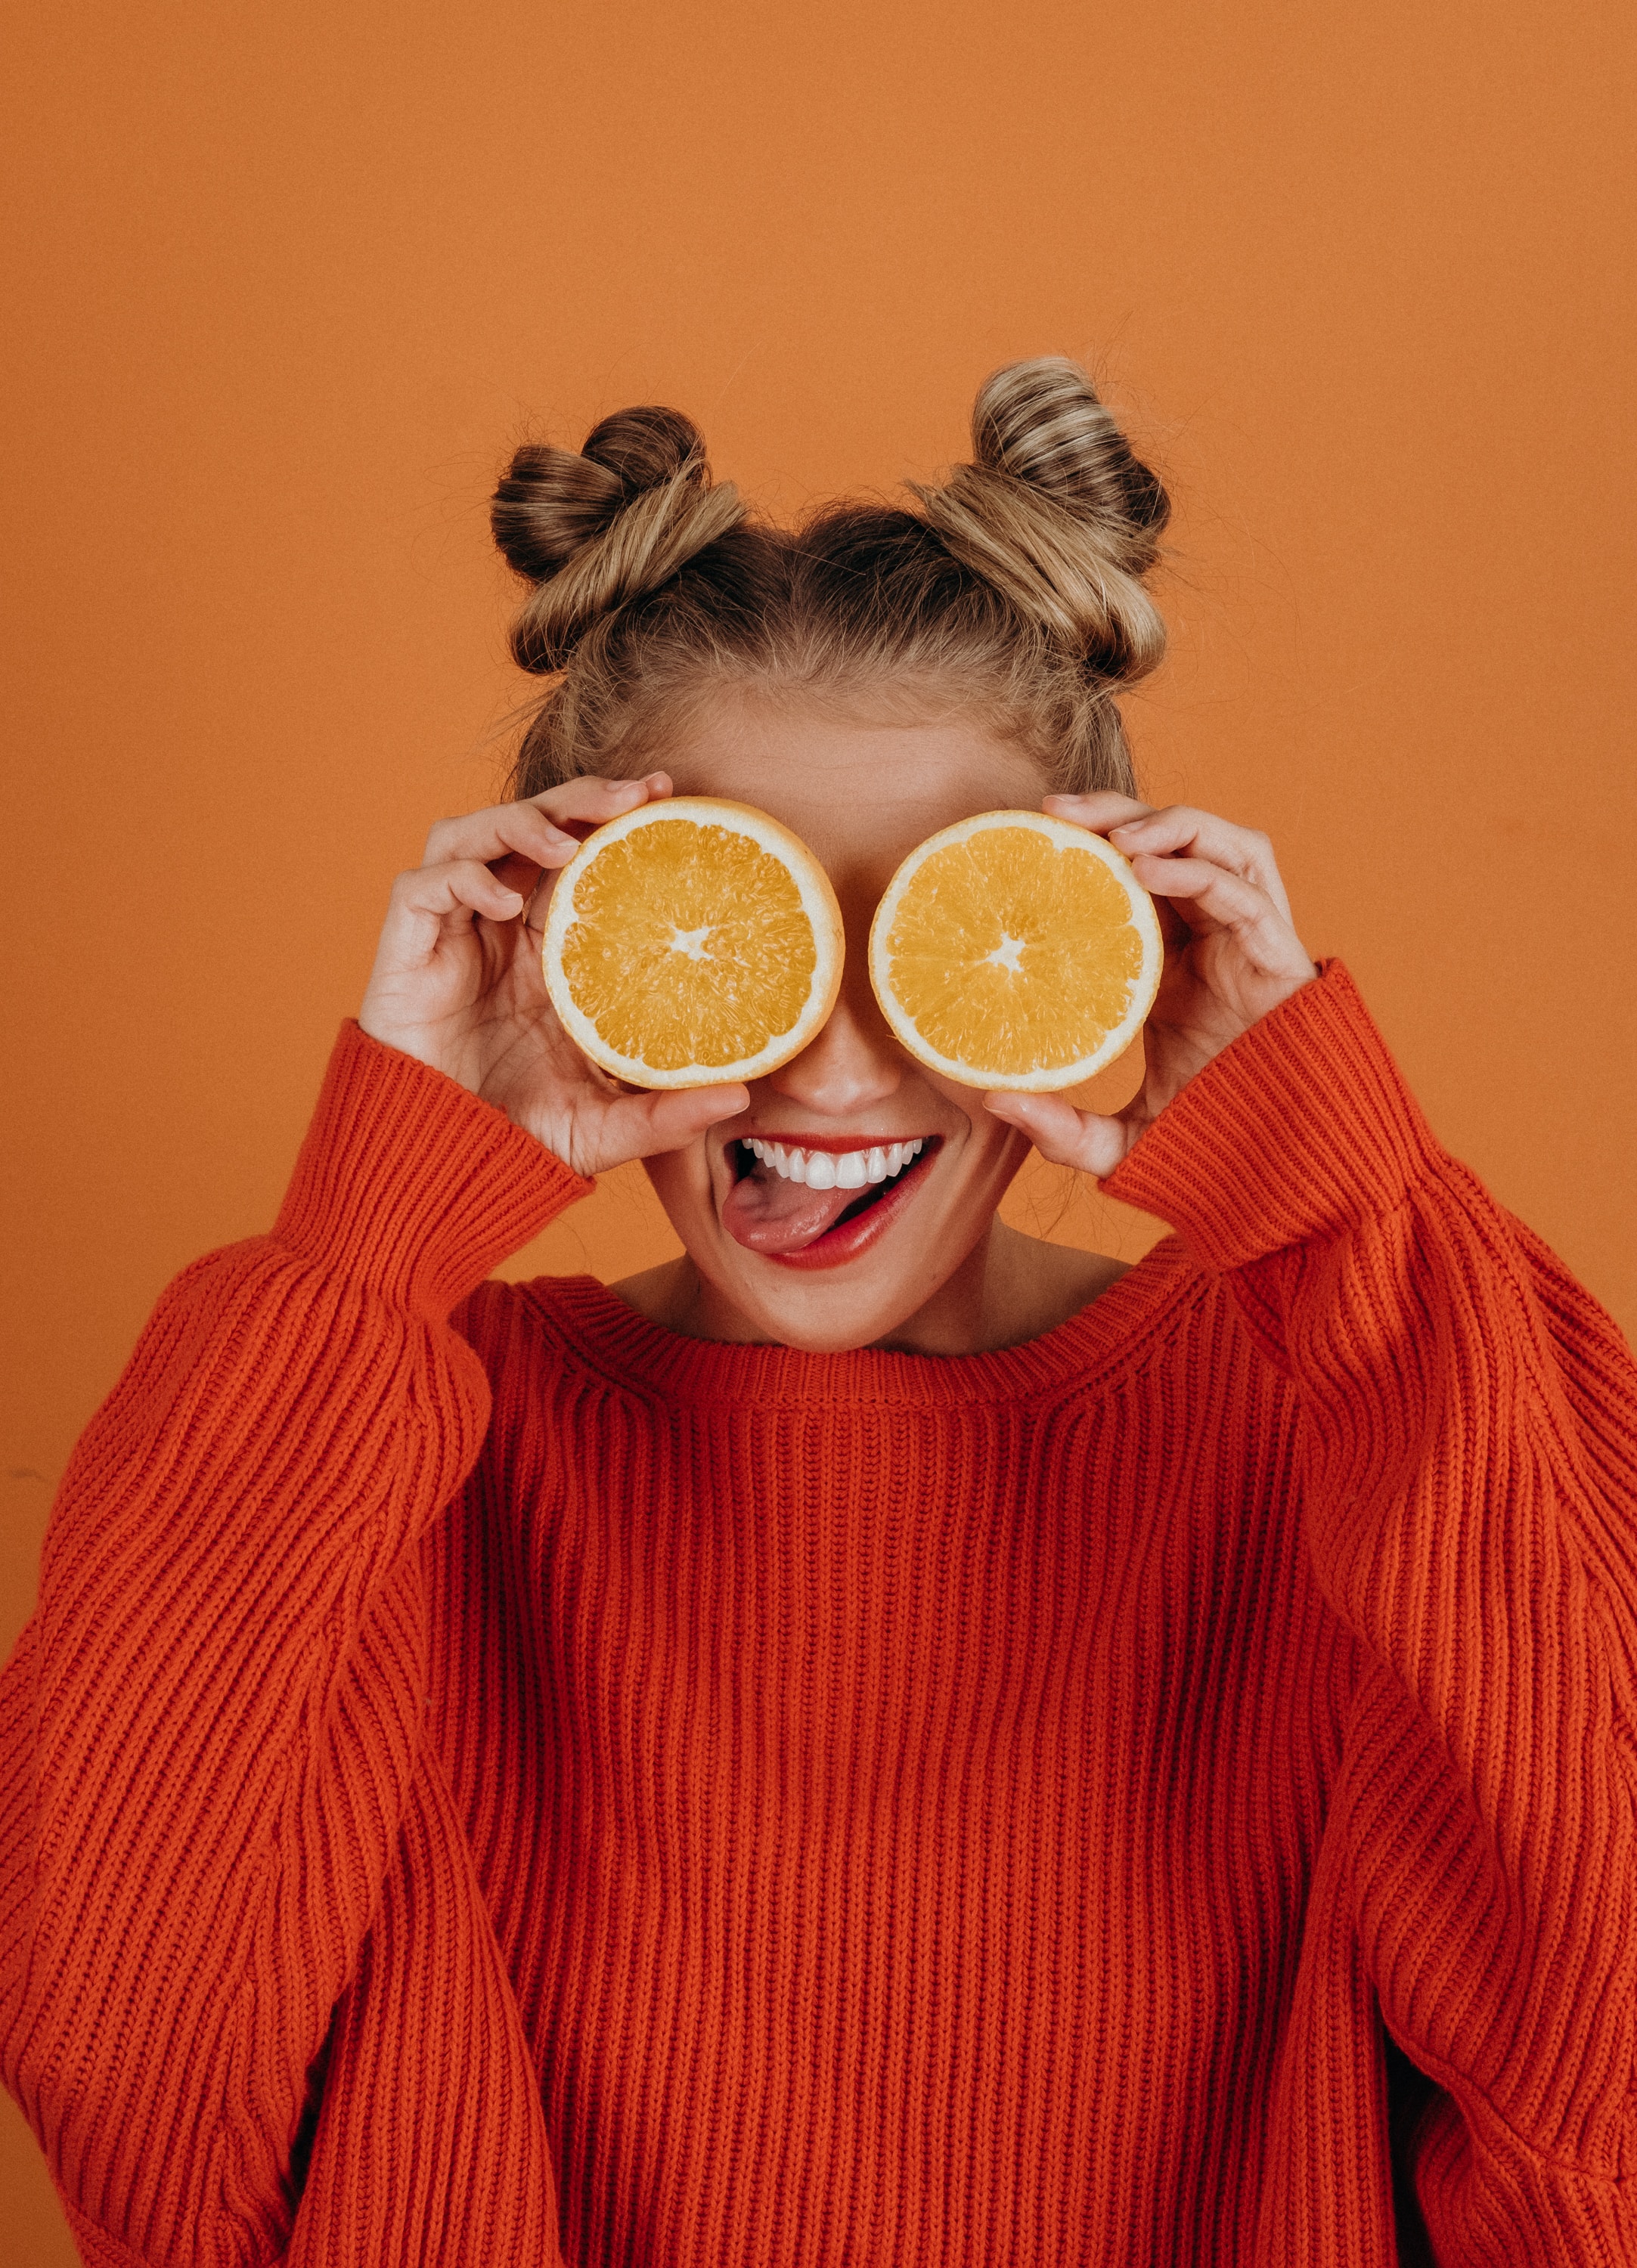 A woman holding orange slices in front of her eyes. │Source: Unsplash